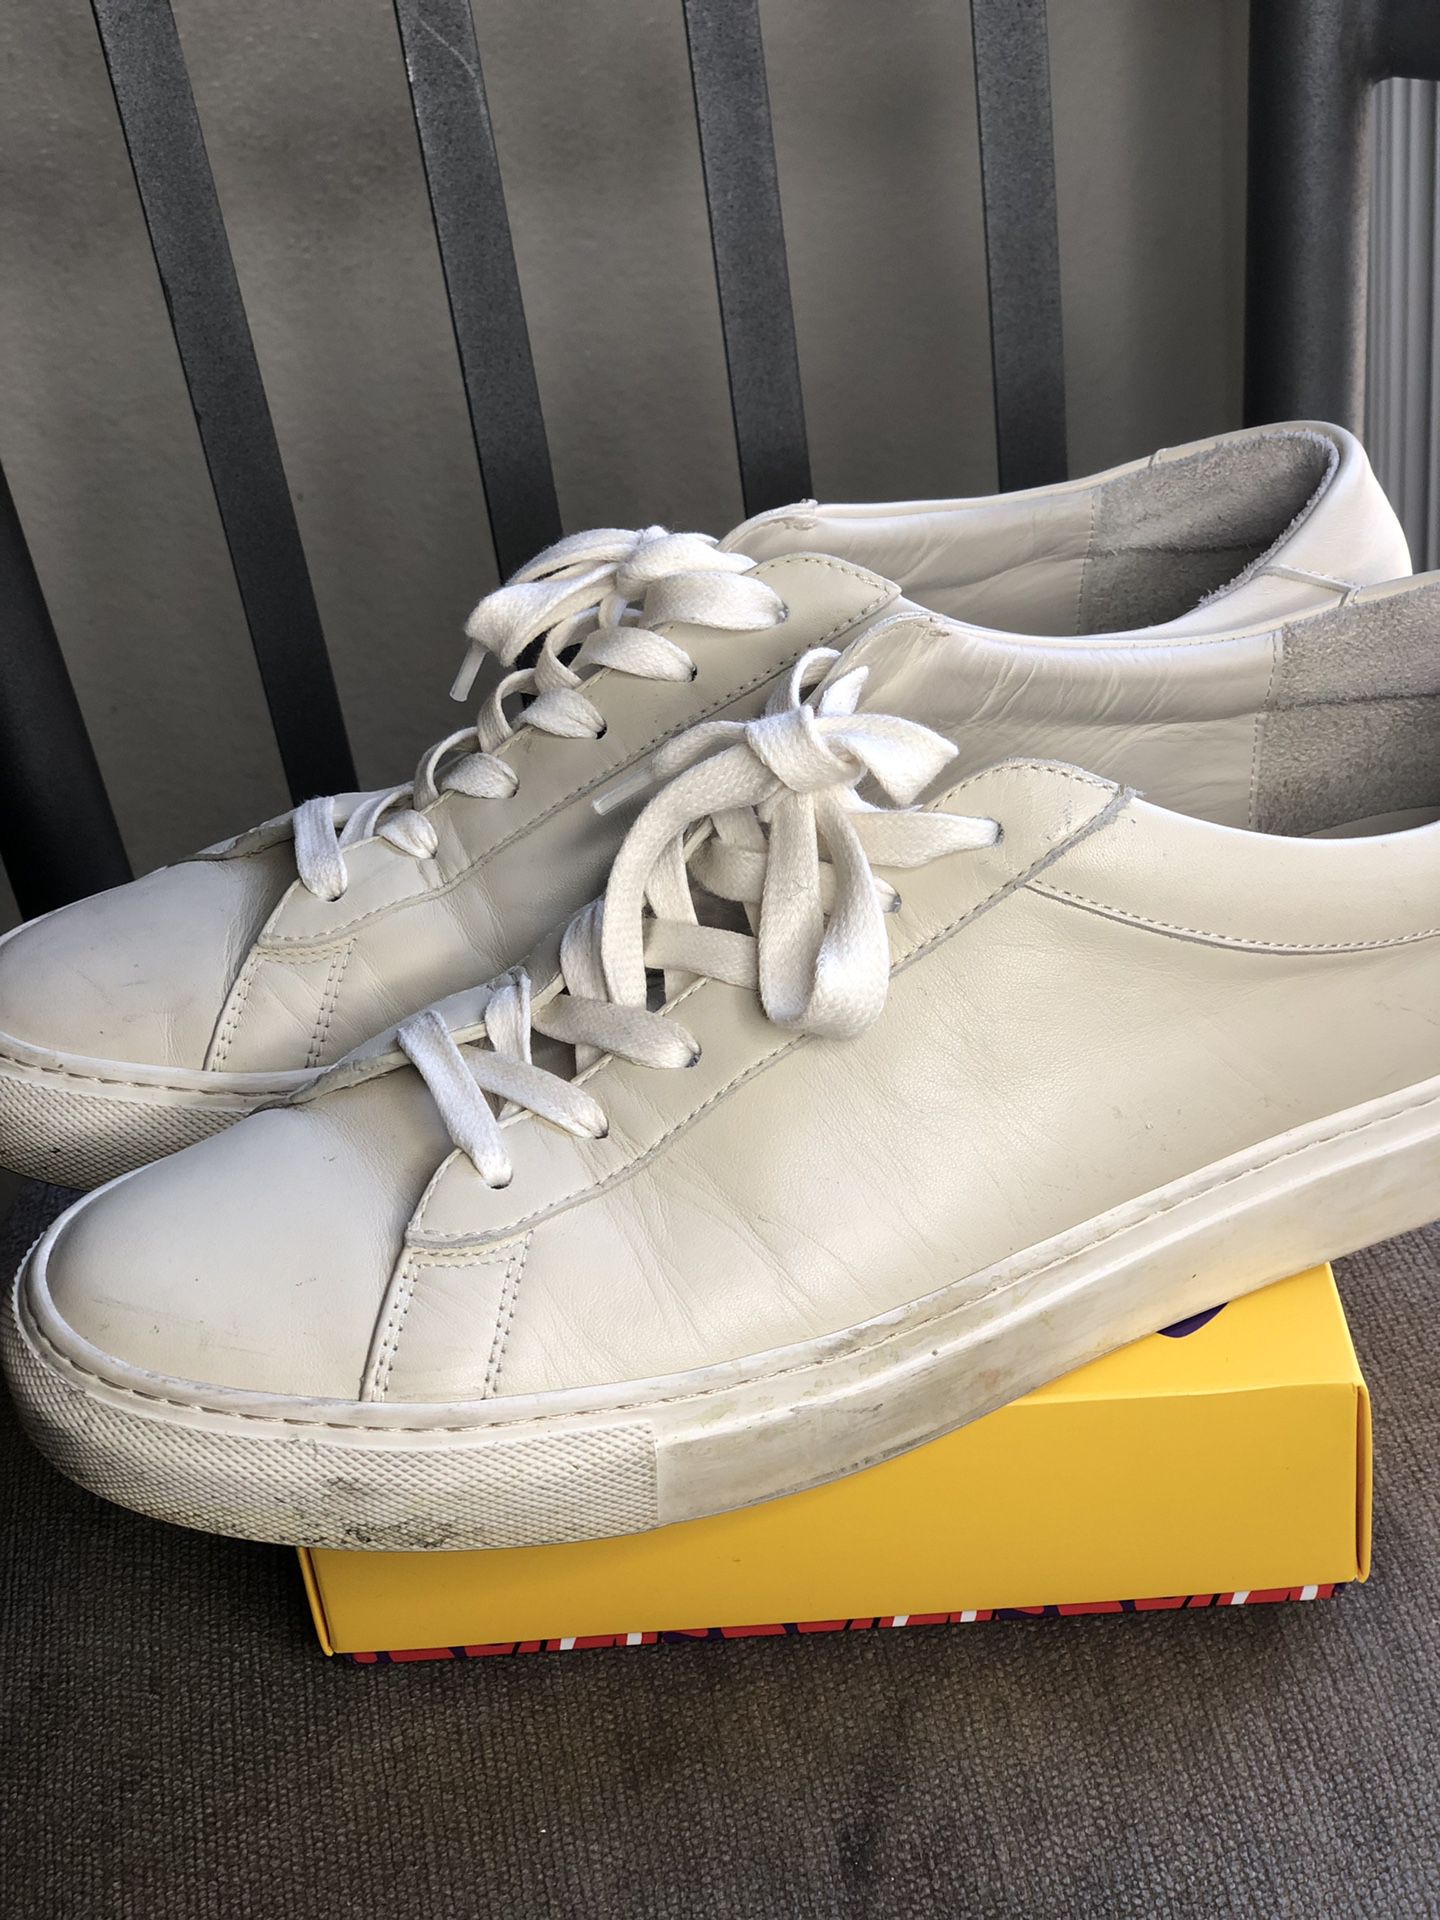 Koio Capri Nuvola Shoes / size 10 for Sale in Los Angeles, CA - OfferUp